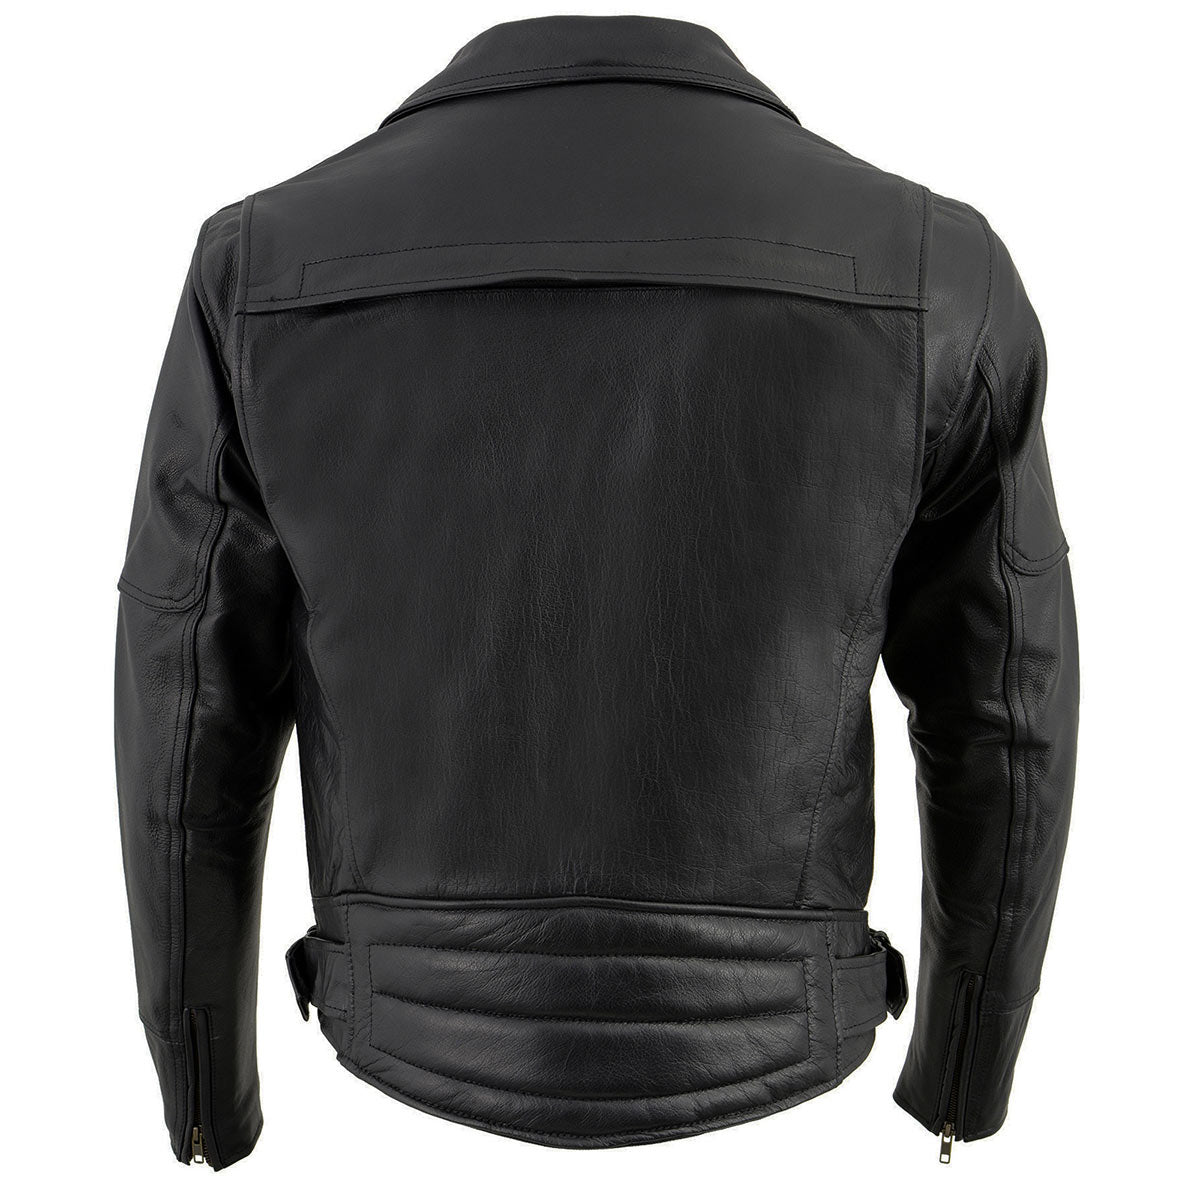 Milwaukee Leather LKM1770 Black Genuine Leather Motorcycle Jacket for Men, 1.3mm Thick Police Style Biker Jacket